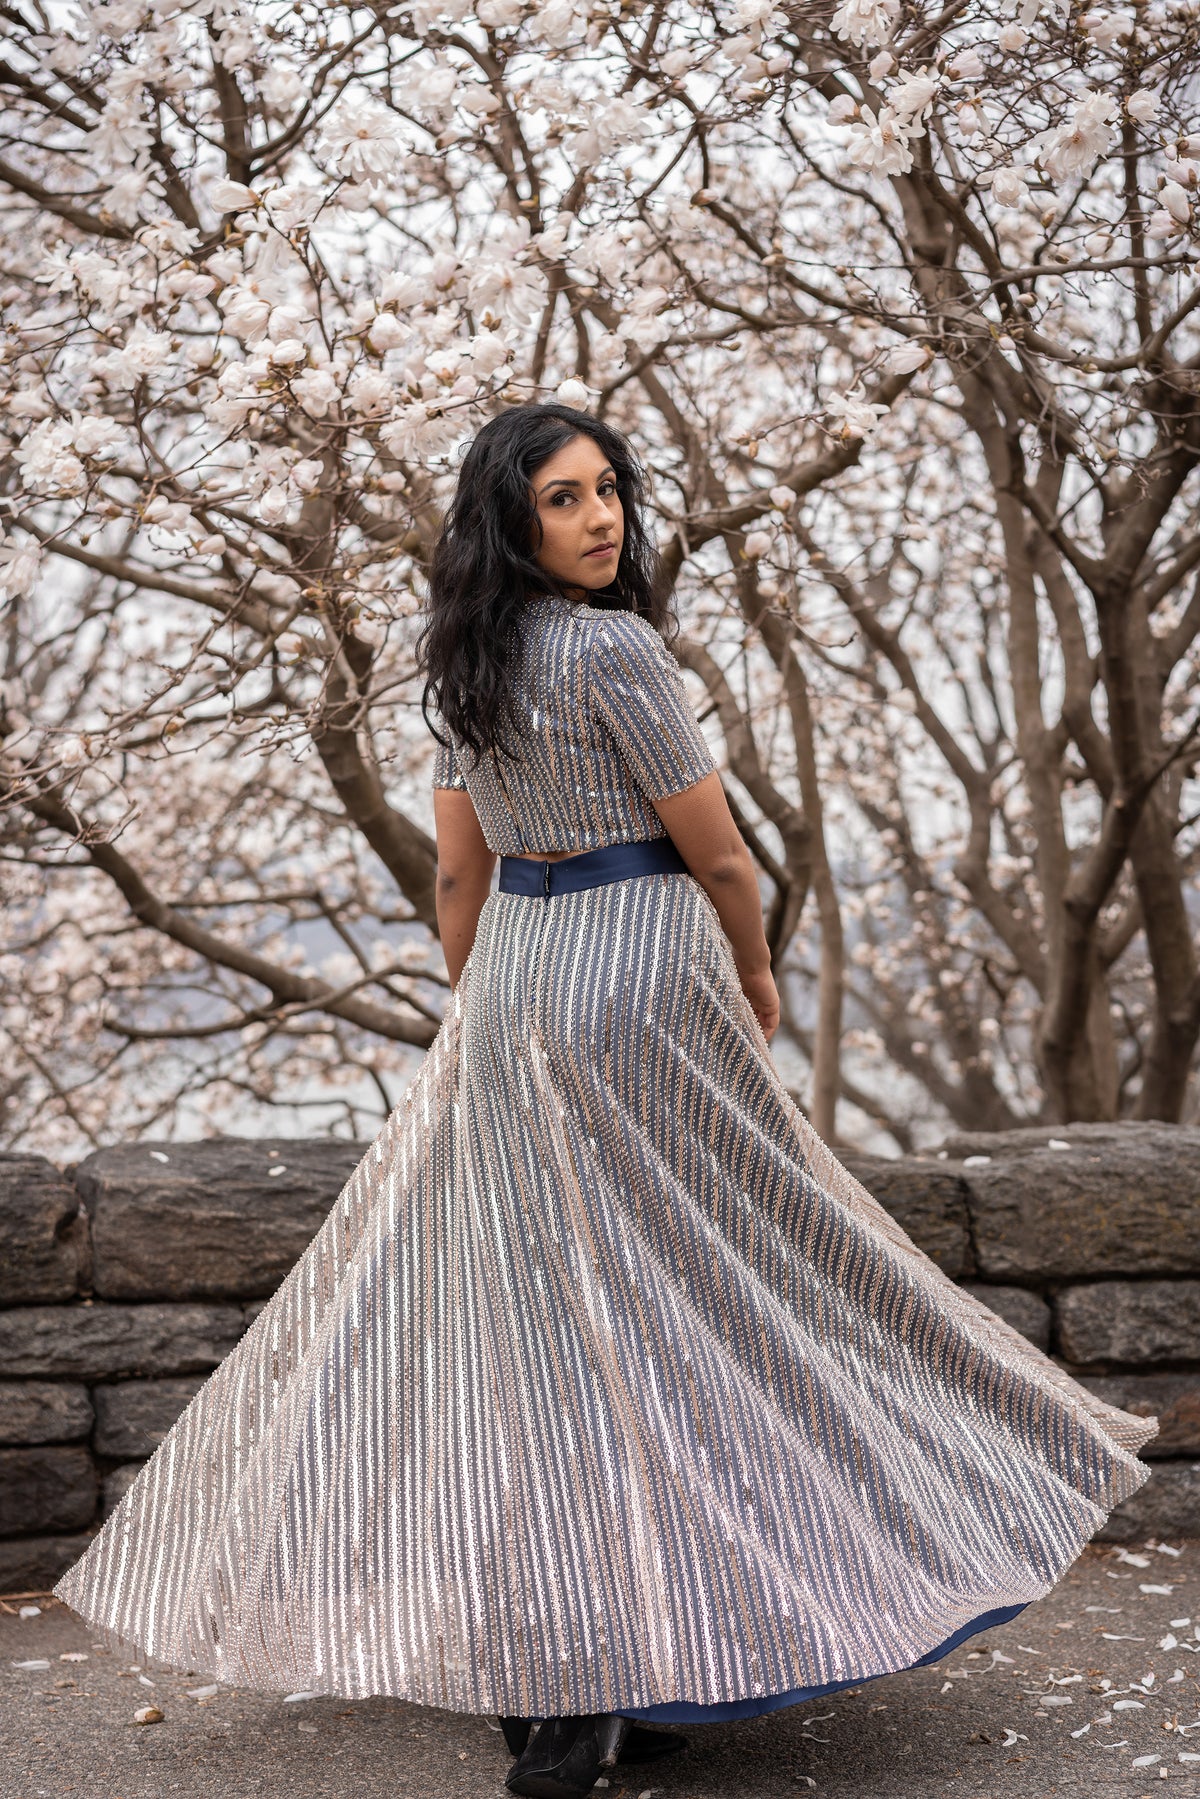 GILLY Striped Beaded Sequin Skirt - Back View - Harleen Kaur - Indian Womenswear